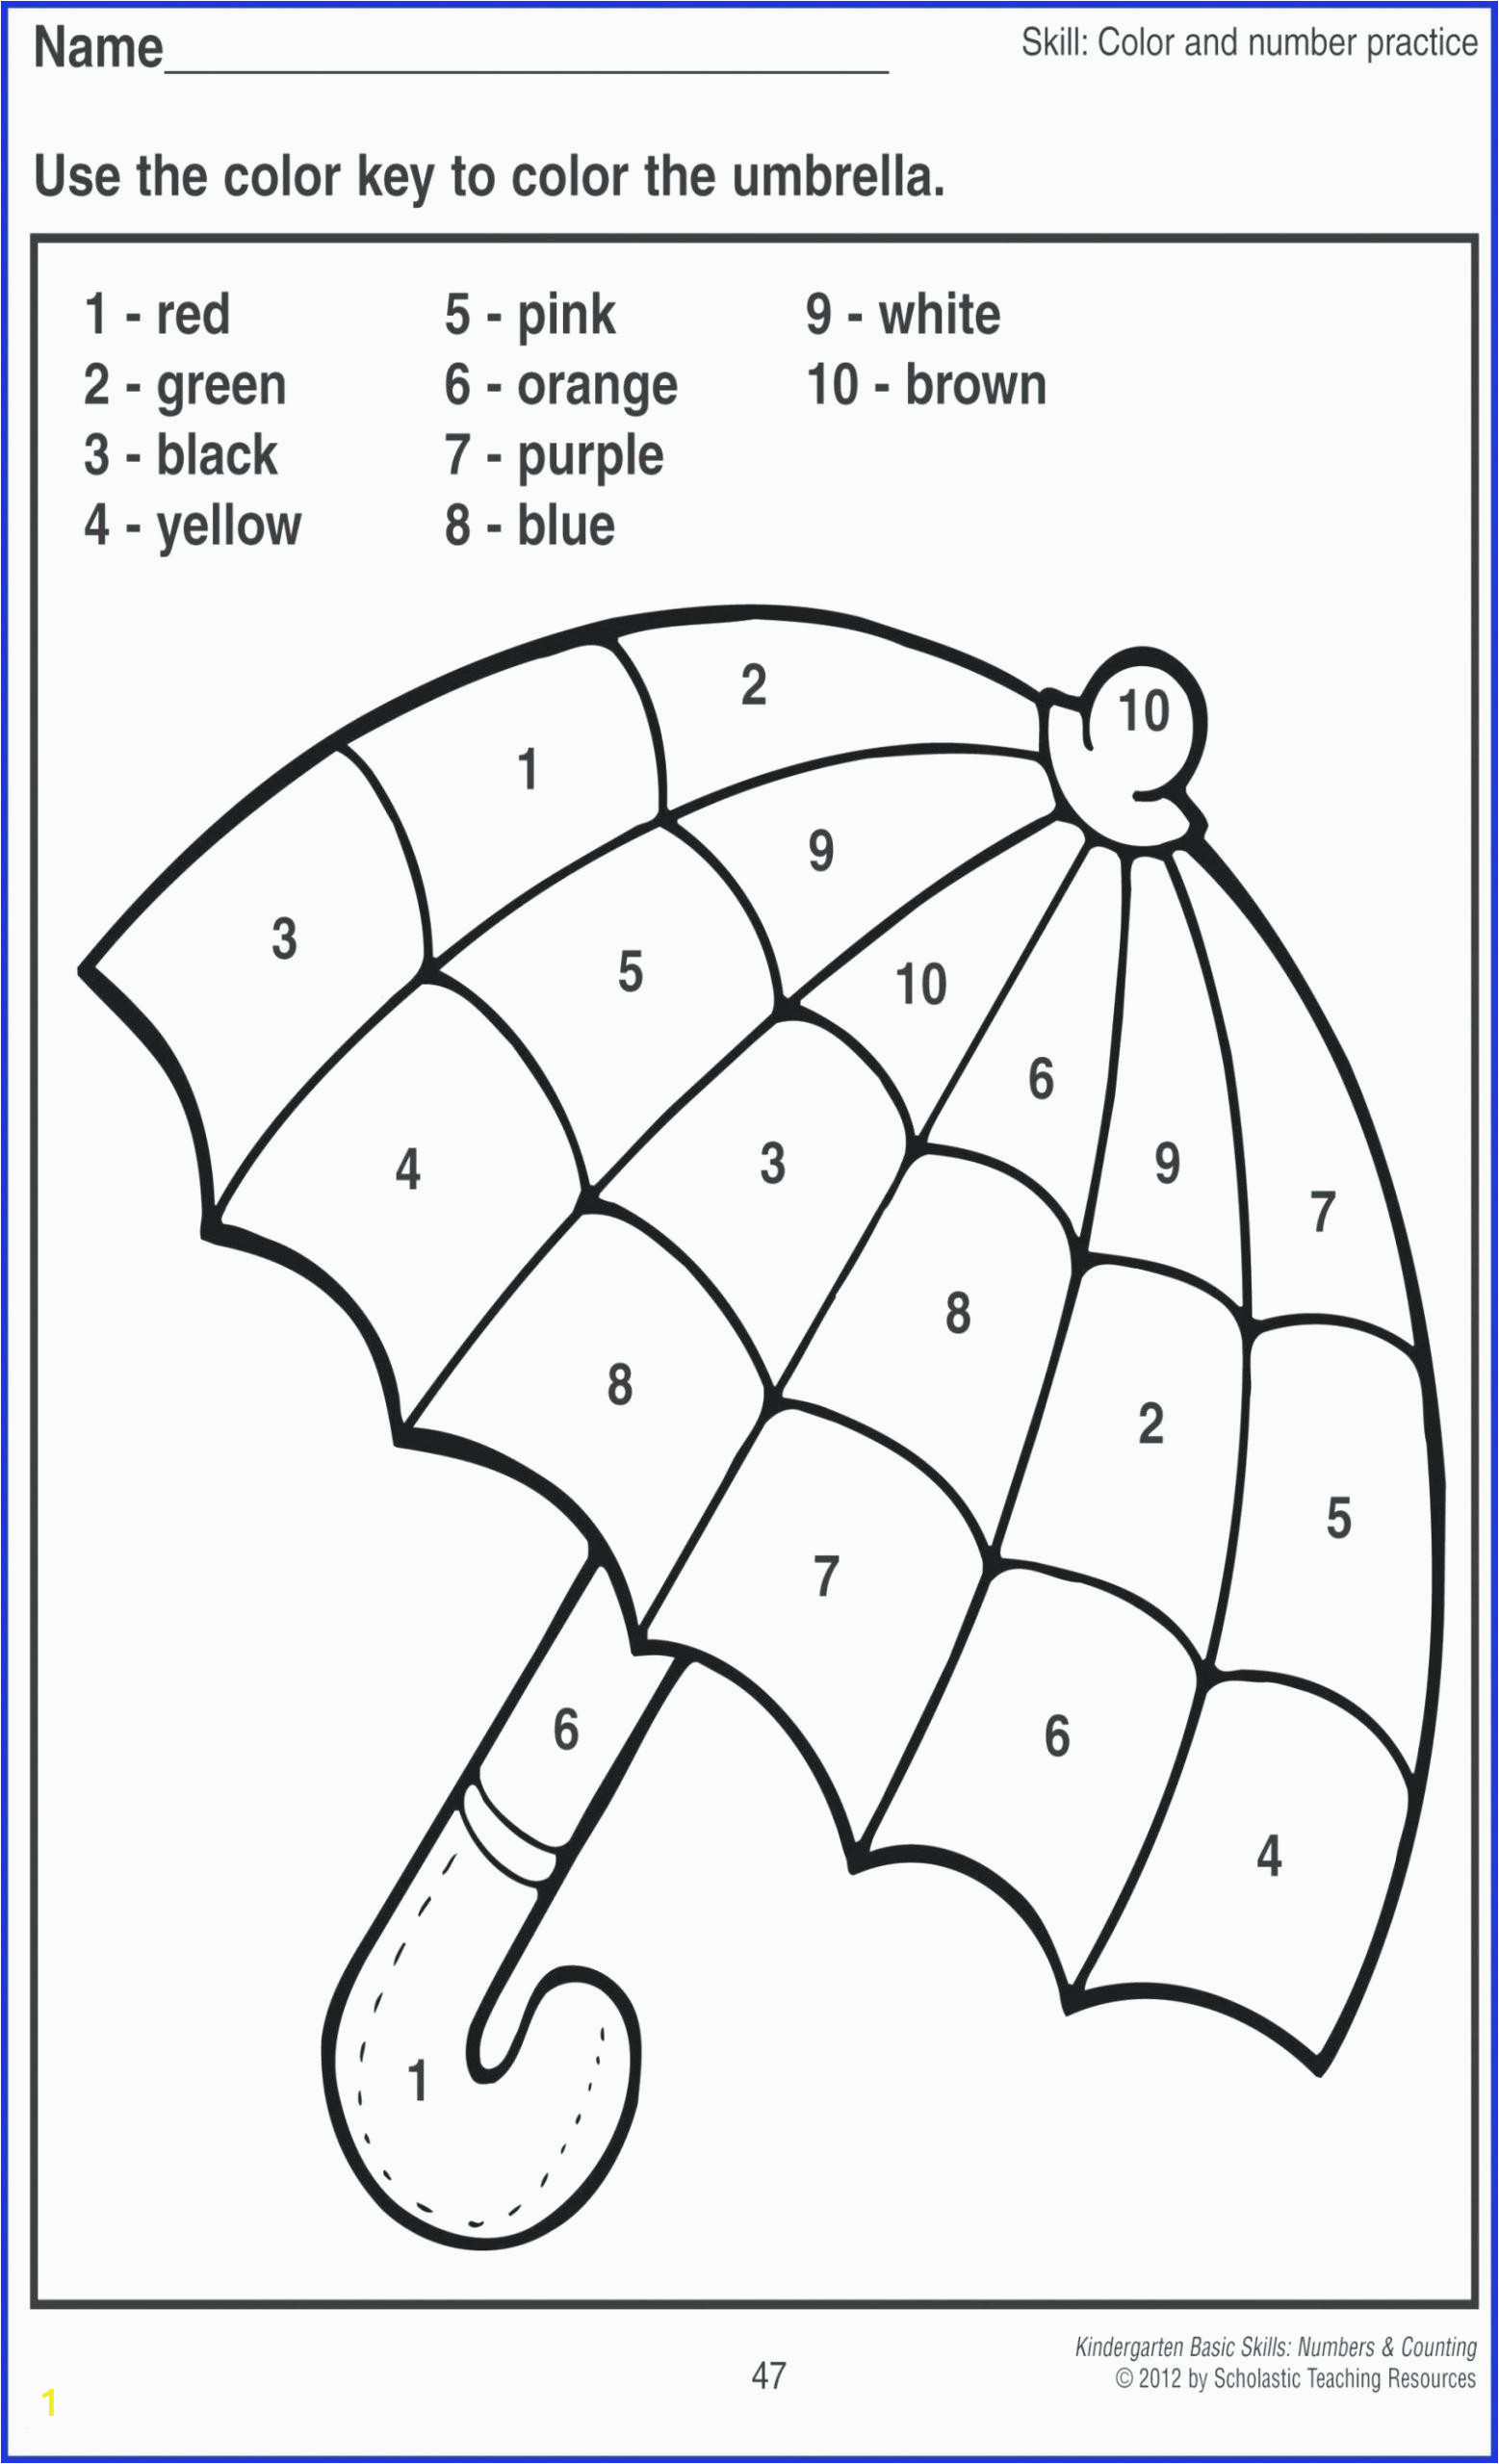 coloring activities for 4 year olds art 8 year old coloring pages nidhibhavsar of coloring activities for 4 year olds